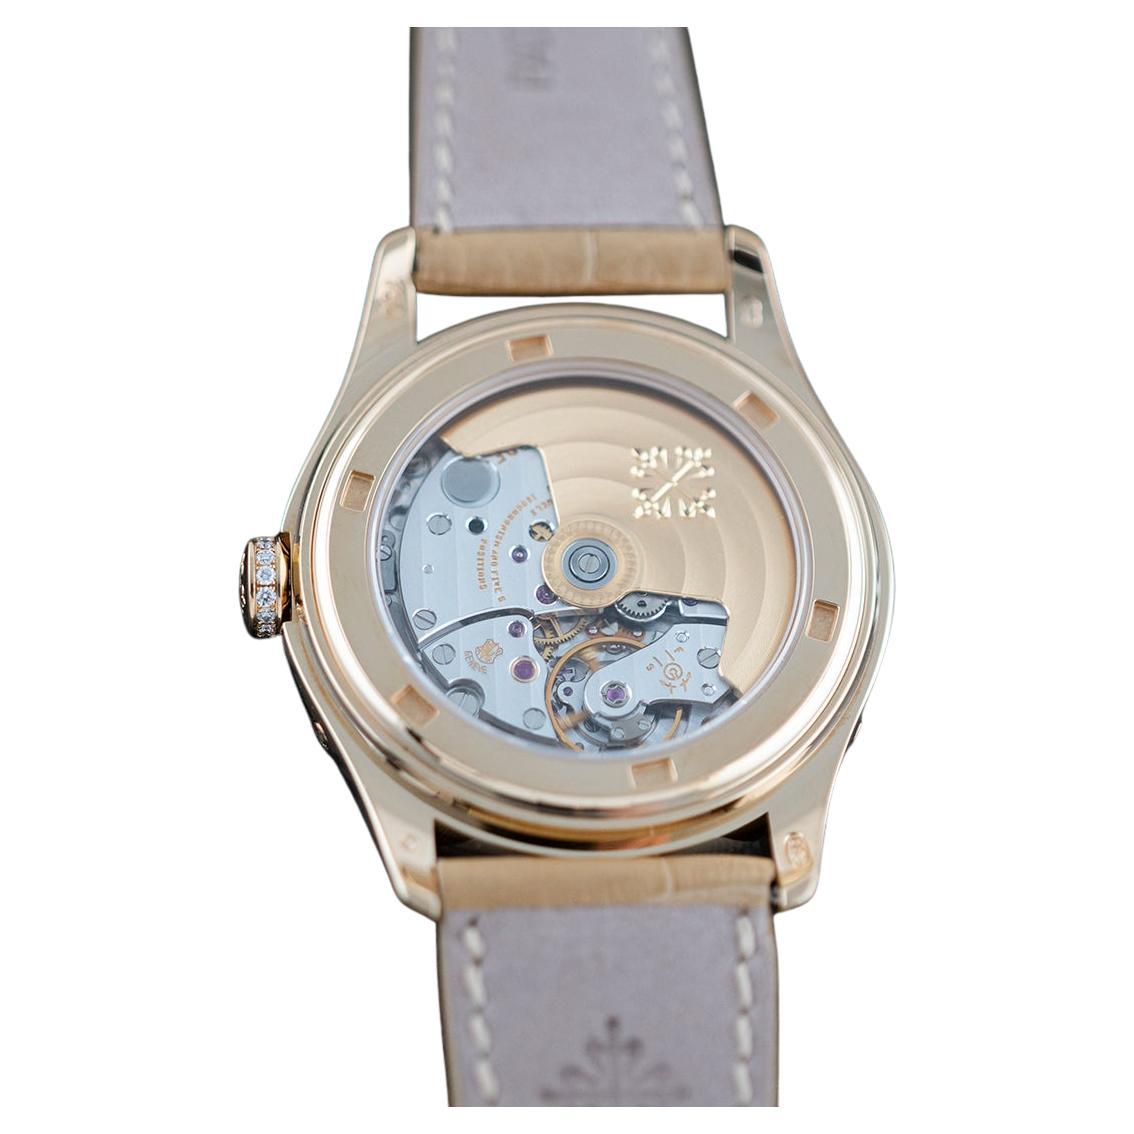 Rare Patek Phillipe Annual Calendar Ladies Watch fitted with, with 18kt/750 Yellow Gold and Diamond Bevel Case, Mother of Pearl Dial, Alligator/Crocodile Leather Strap, Clasp Tang Crystal, Scratch Resistant Sapphire Case Back Scratch Resistant